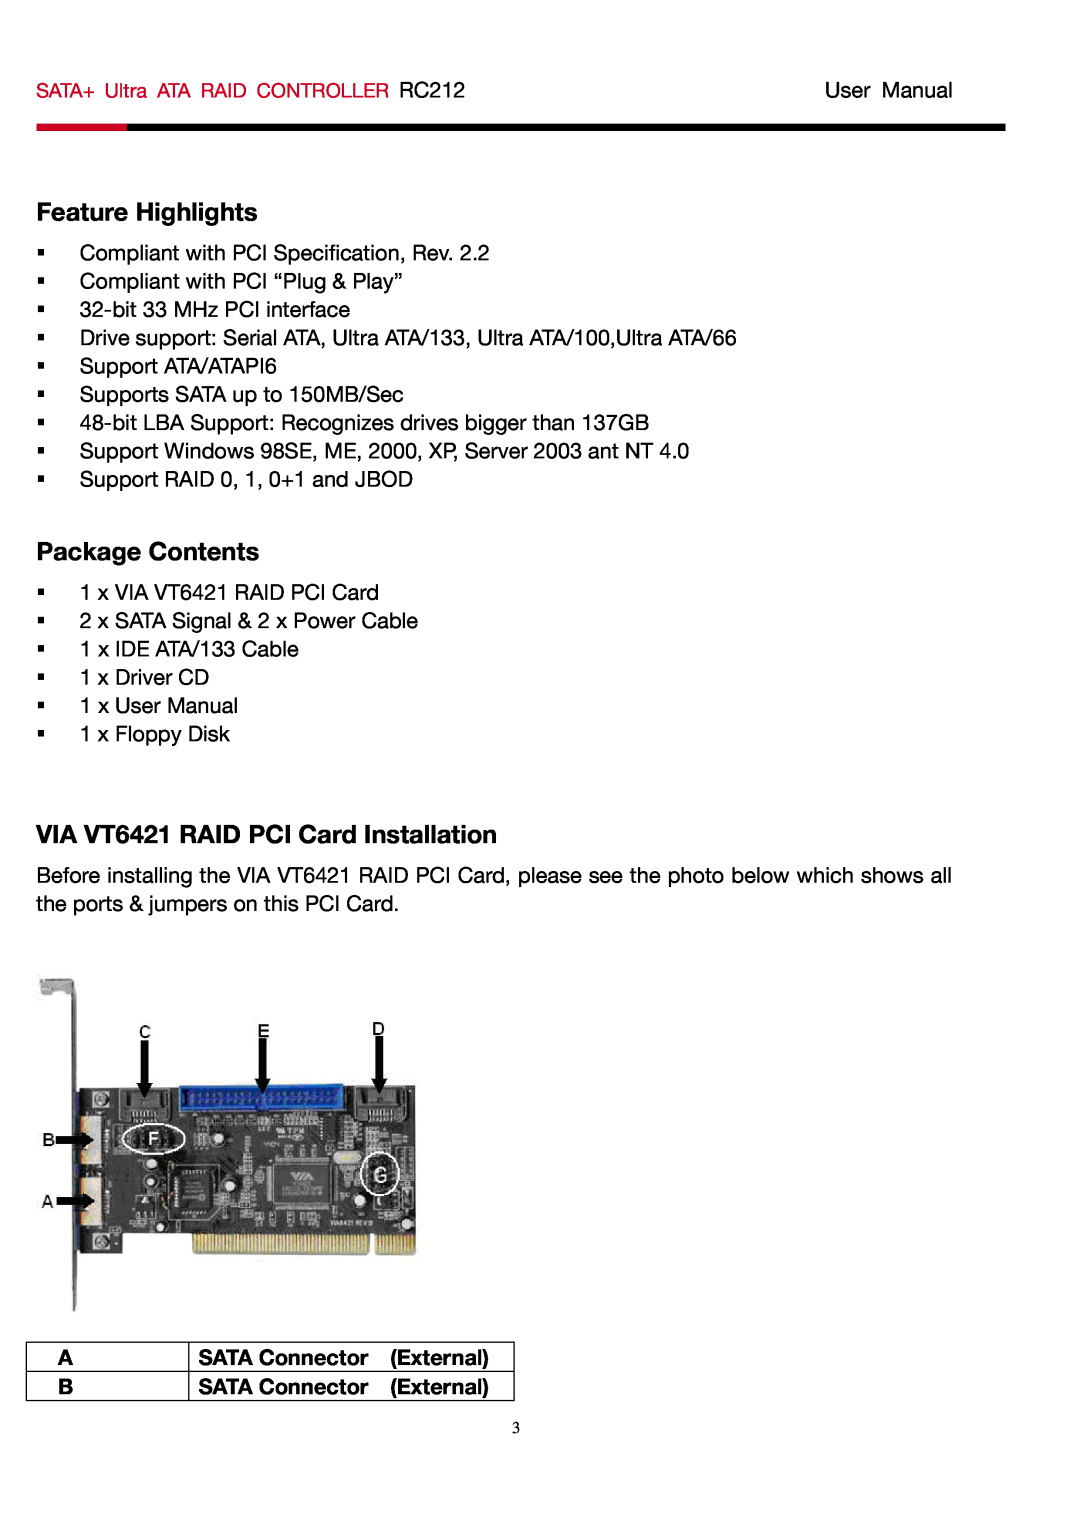 Rosewill RC212 user manual Feature Highlights, Package Contents, VIA VT6421 RAID PCI Card Installation 